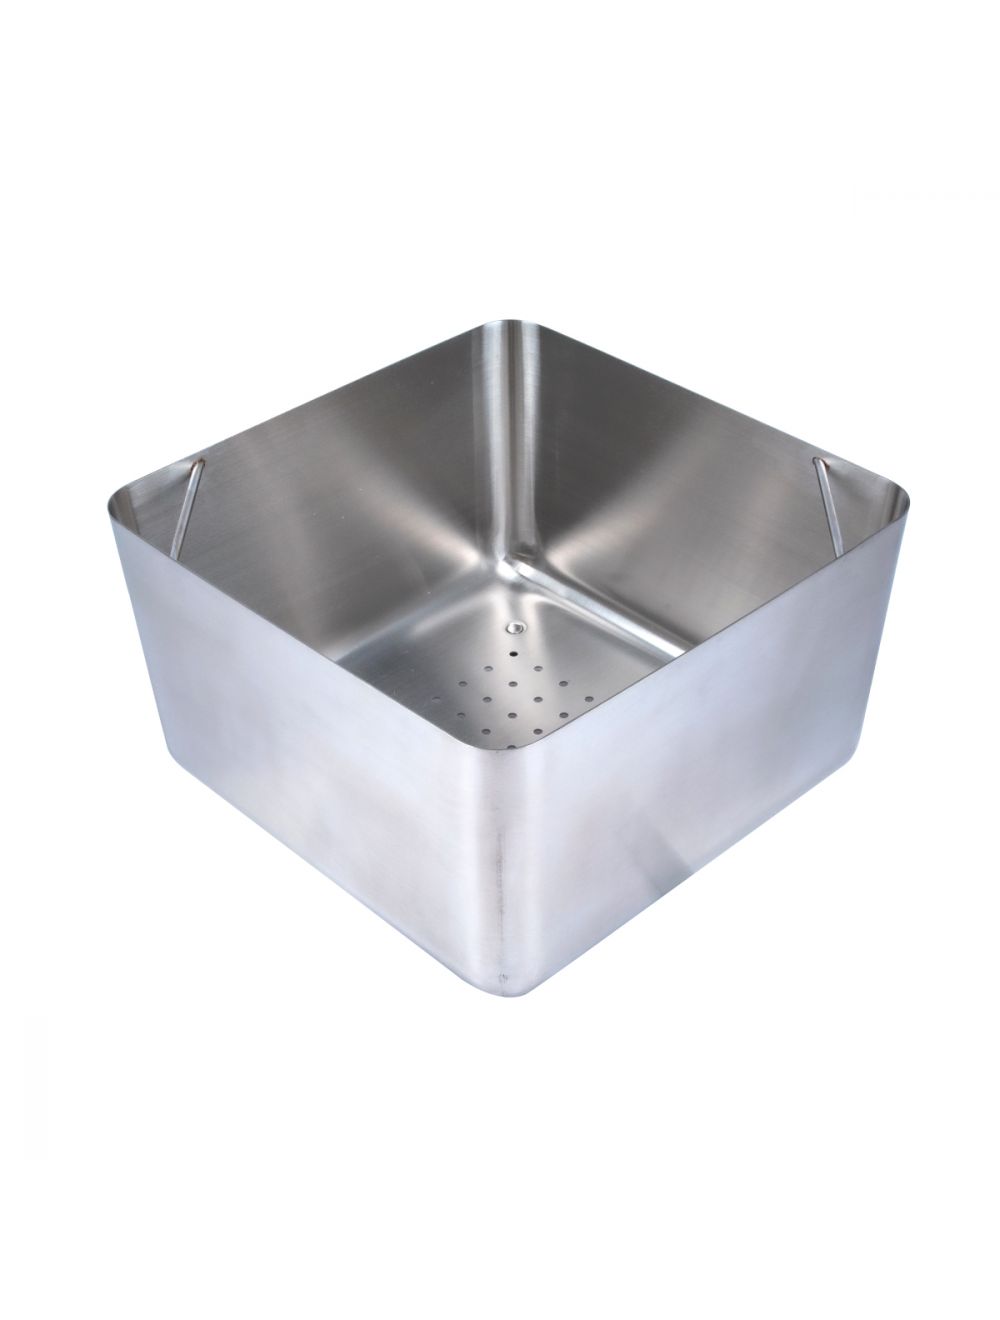 Ice Well Removable Basket (Suit ICE-403530 - ICEDI-403530)